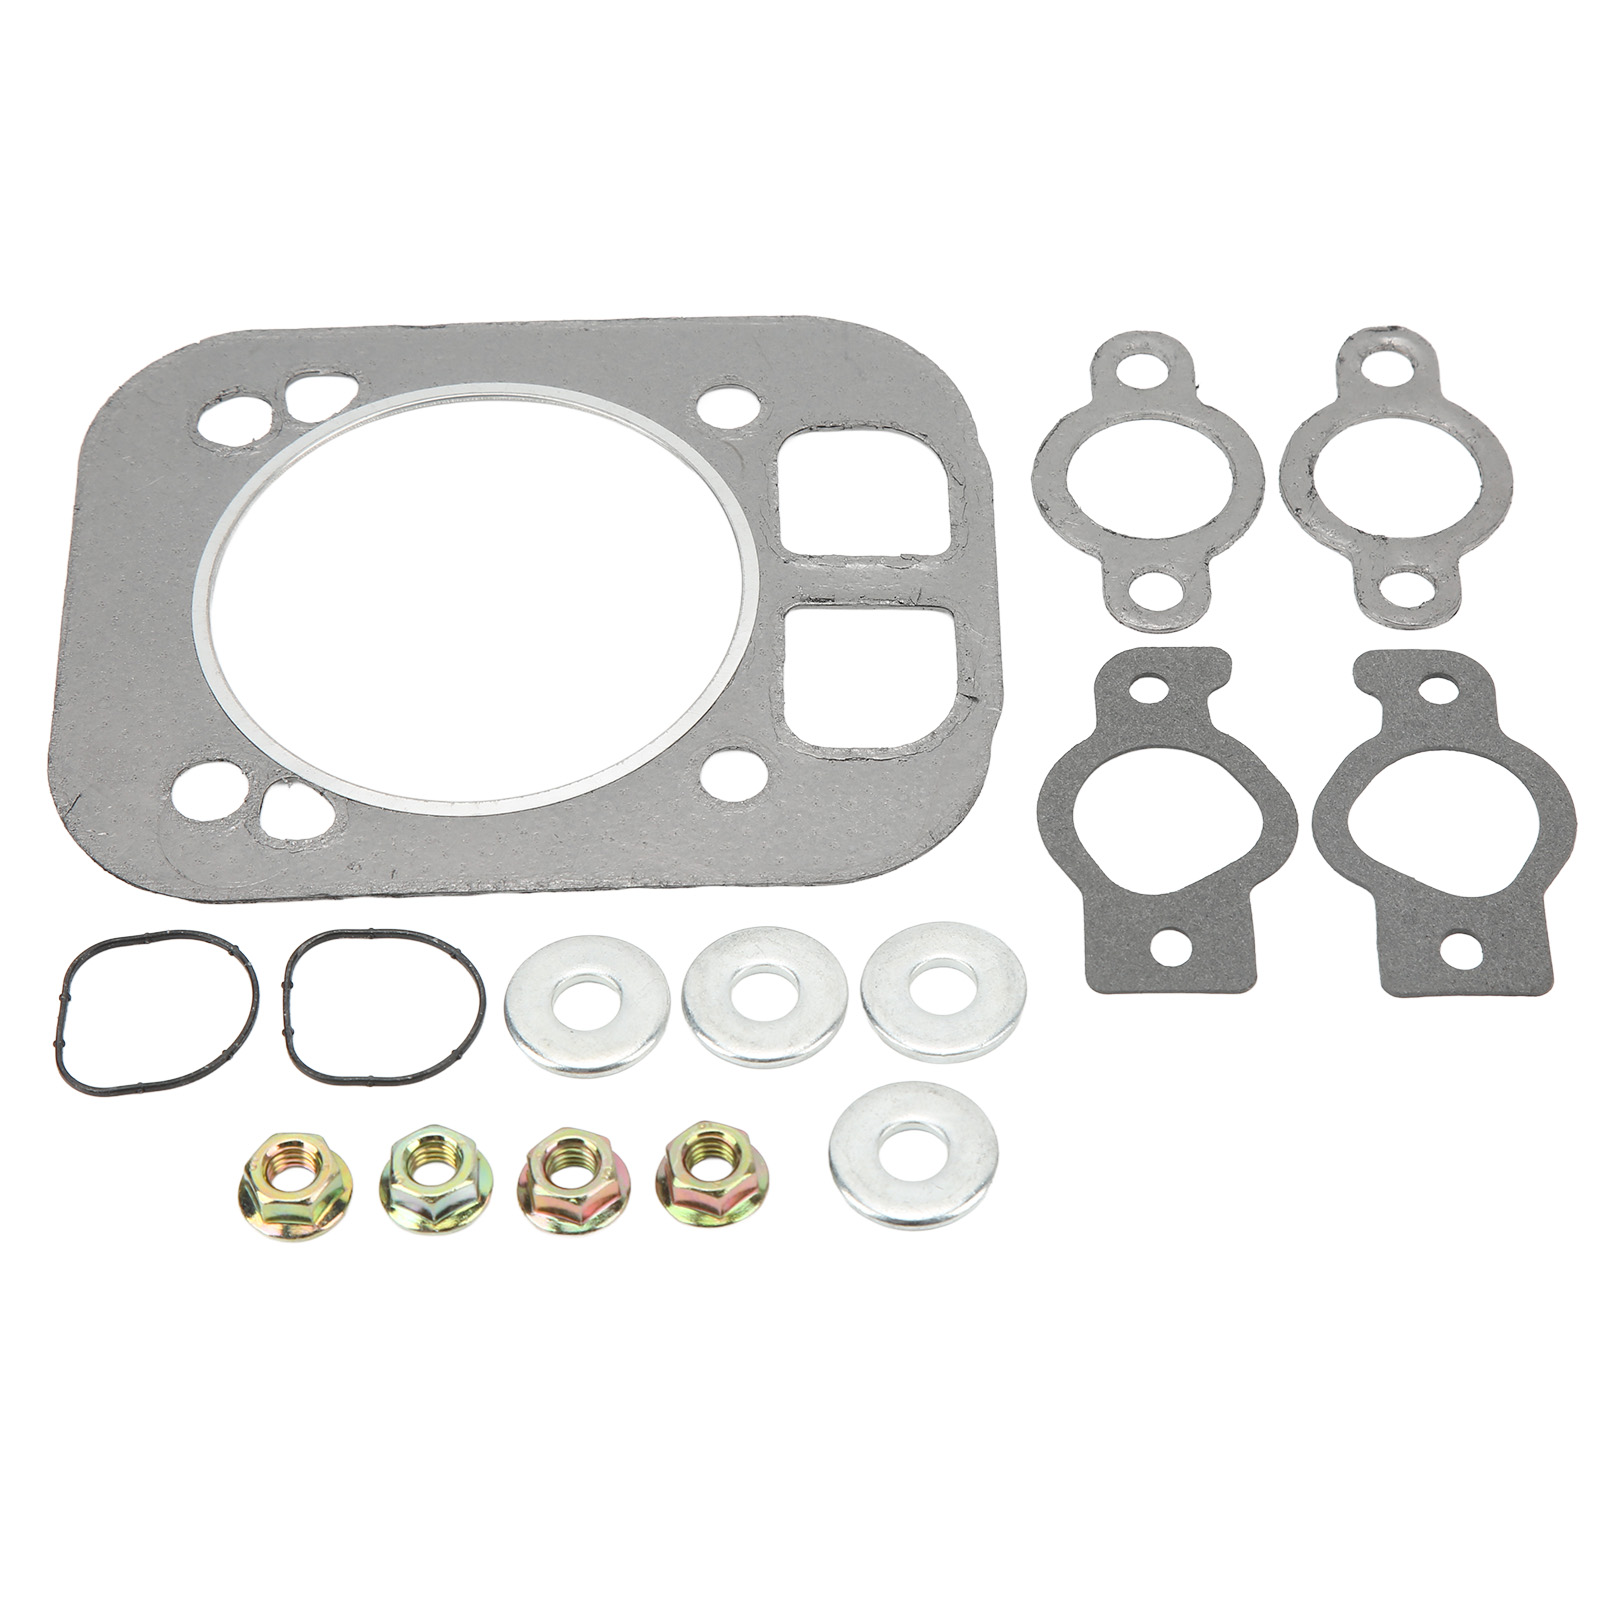 24 841 04S, Impact Proof Heavy Duty Durable Cylinder Head Gasket Kit Engine  Cylinder Gasket Kit Wear Resistant High Strength For Engine Walmart Canada